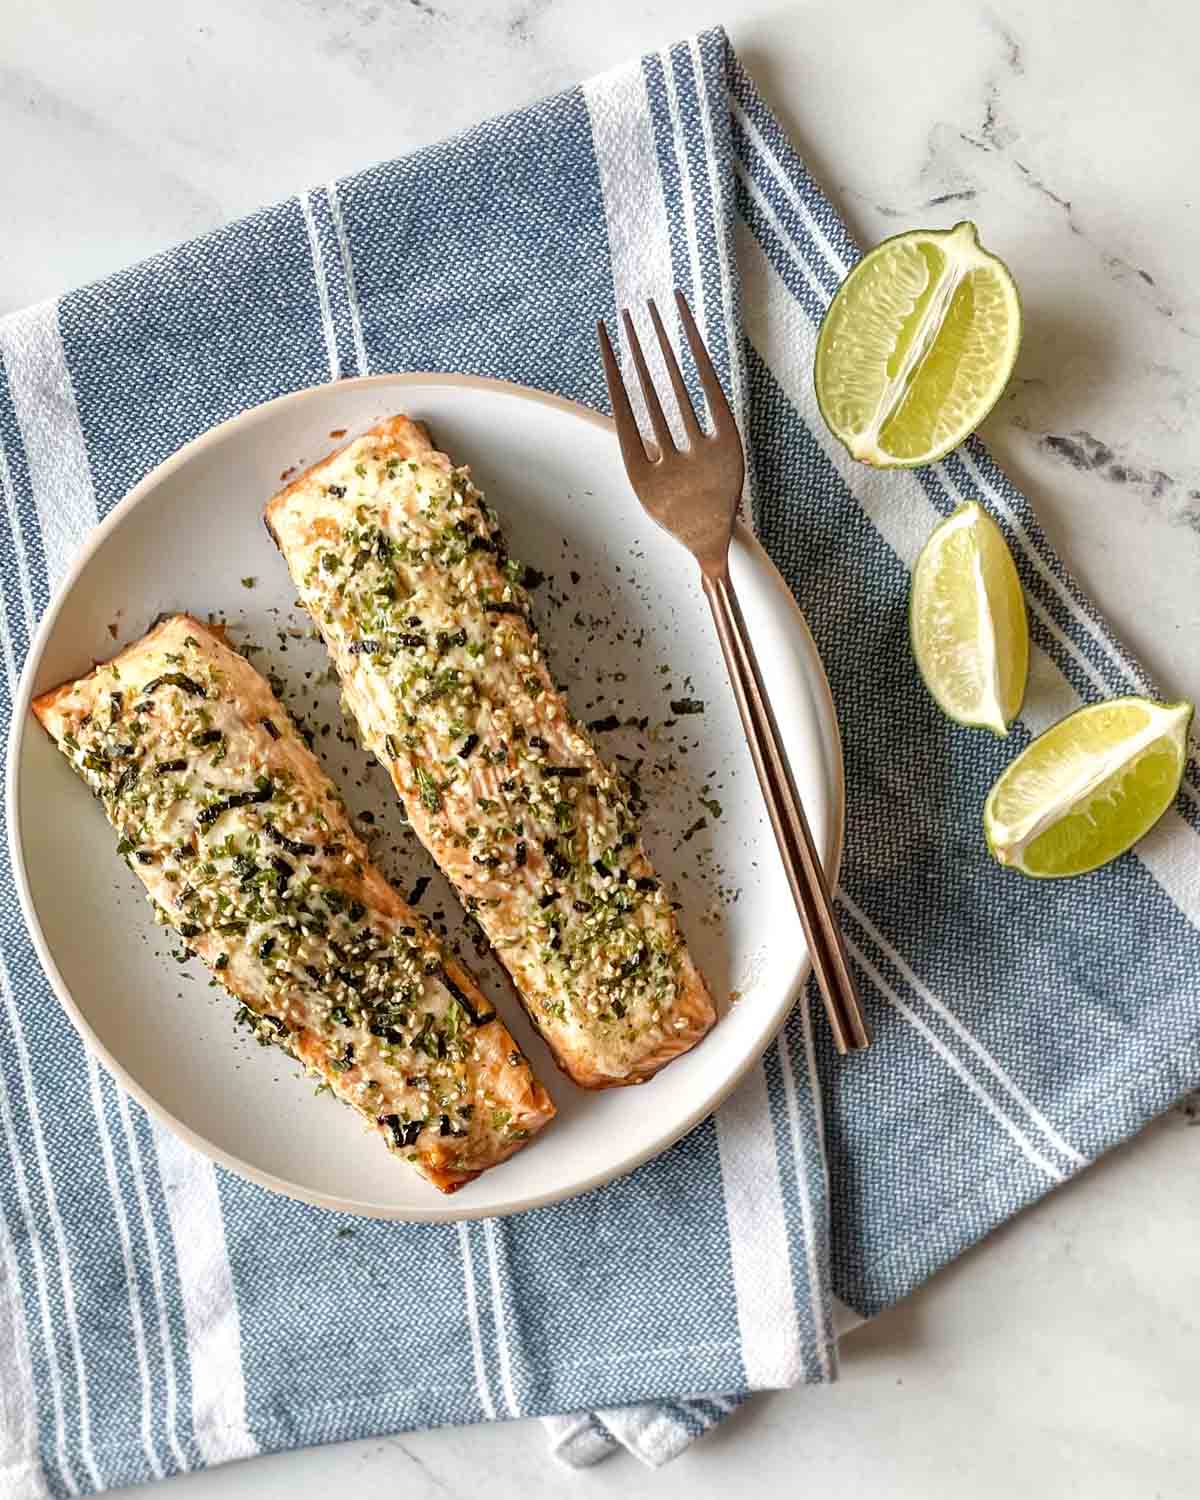 Two baked salmon fillets coated in mayonnaise and furikake sit on a white plate on a blue and white linen with lime slices.